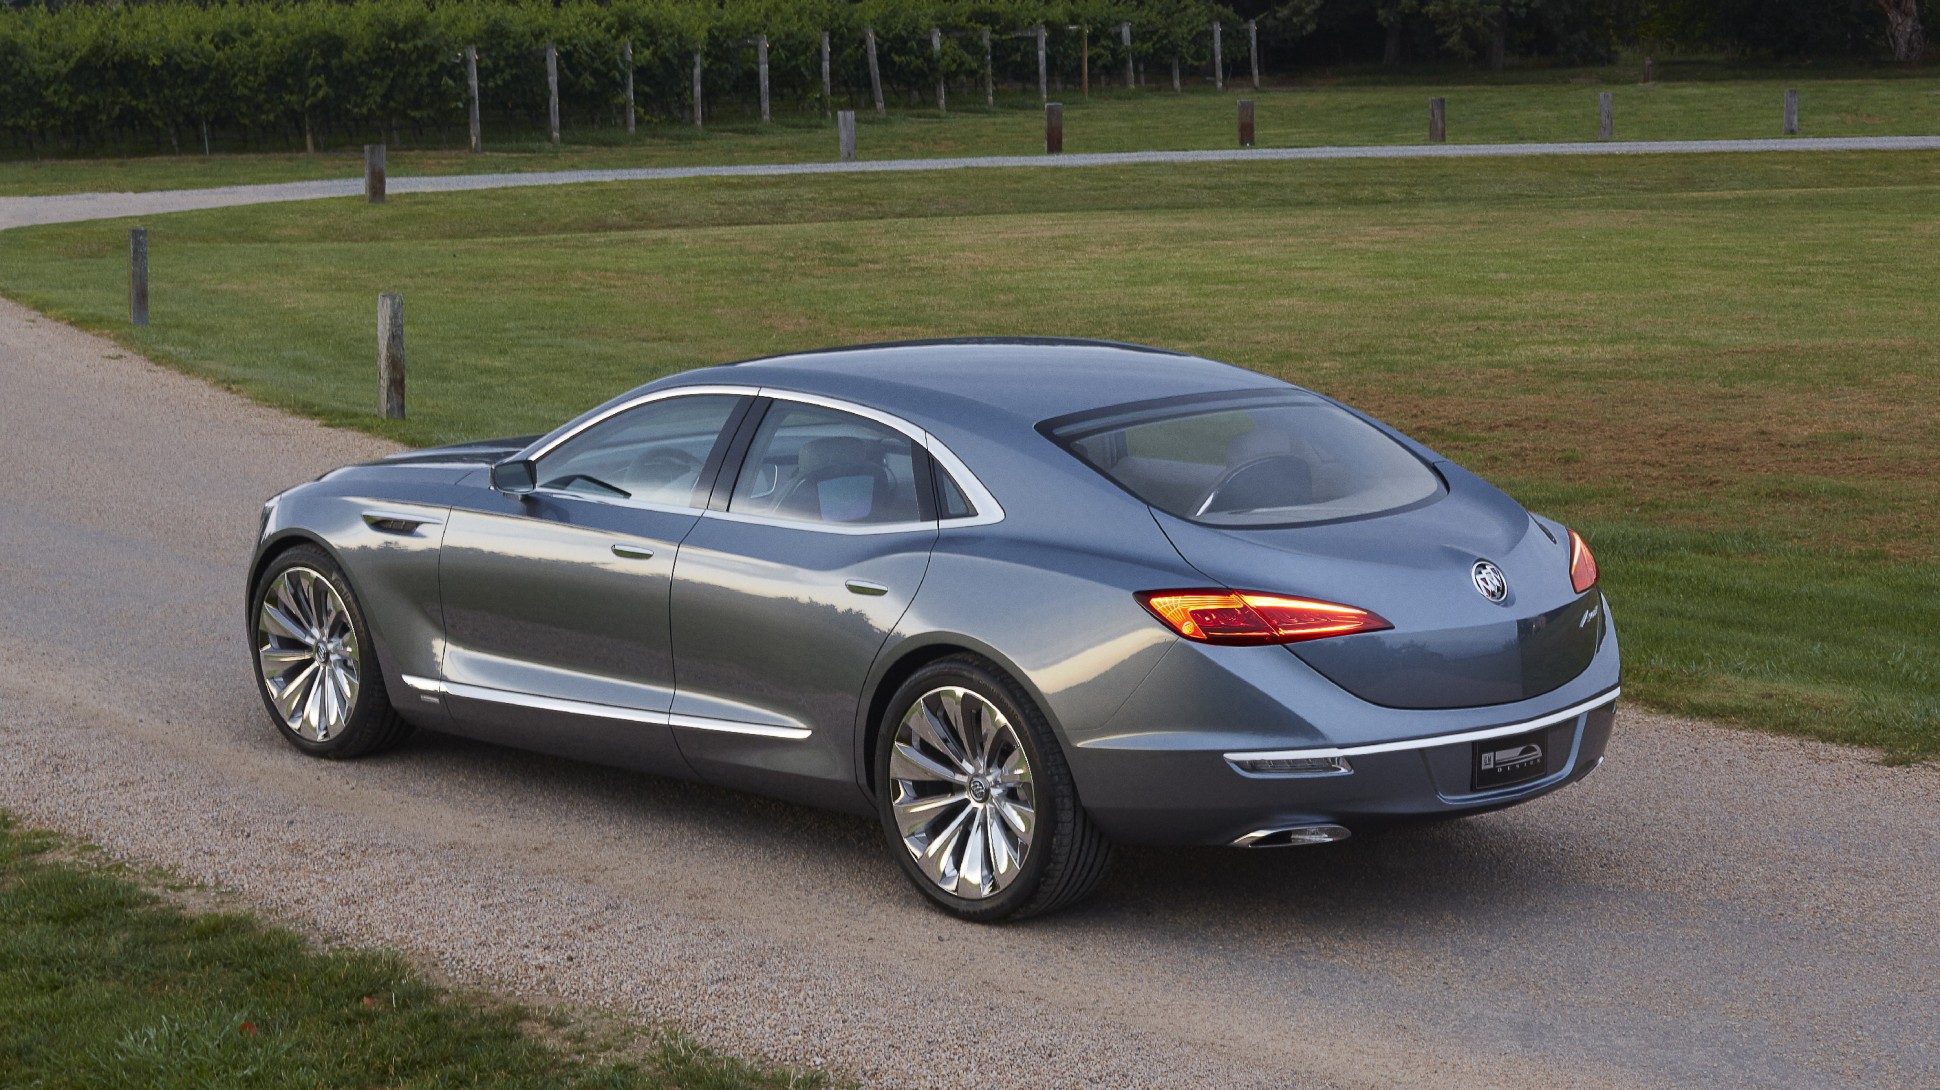 What Mary Barra's Growth Plans And A Beautiful New Buick Say About GM In 2015